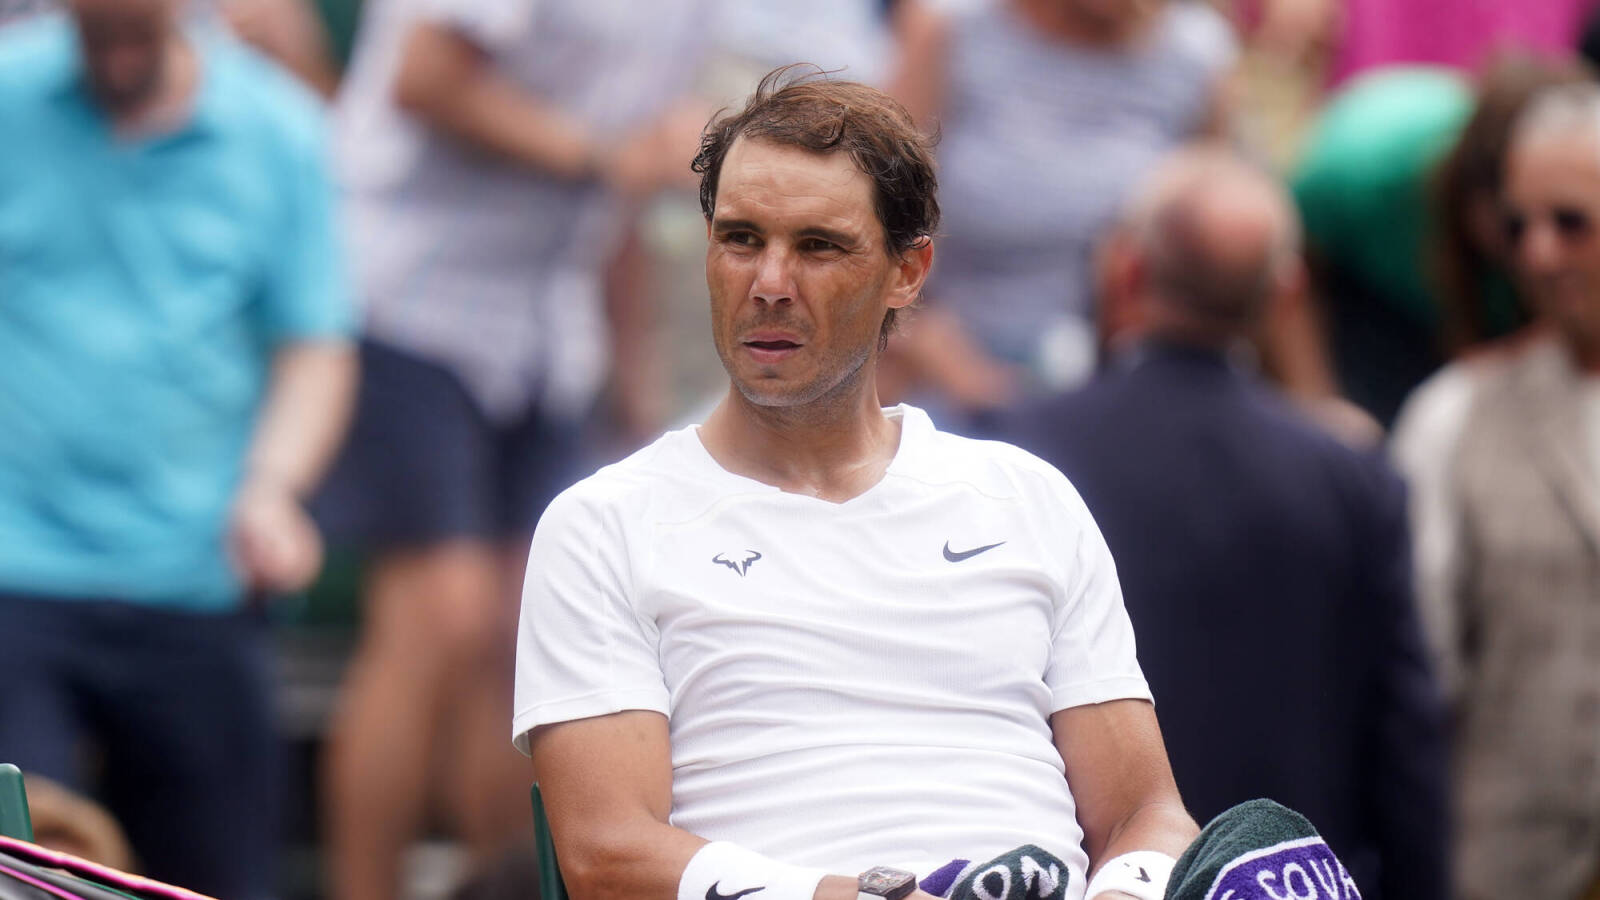 Rafael Nadal Is Going To Play Roland Garros Says Uncle Toni